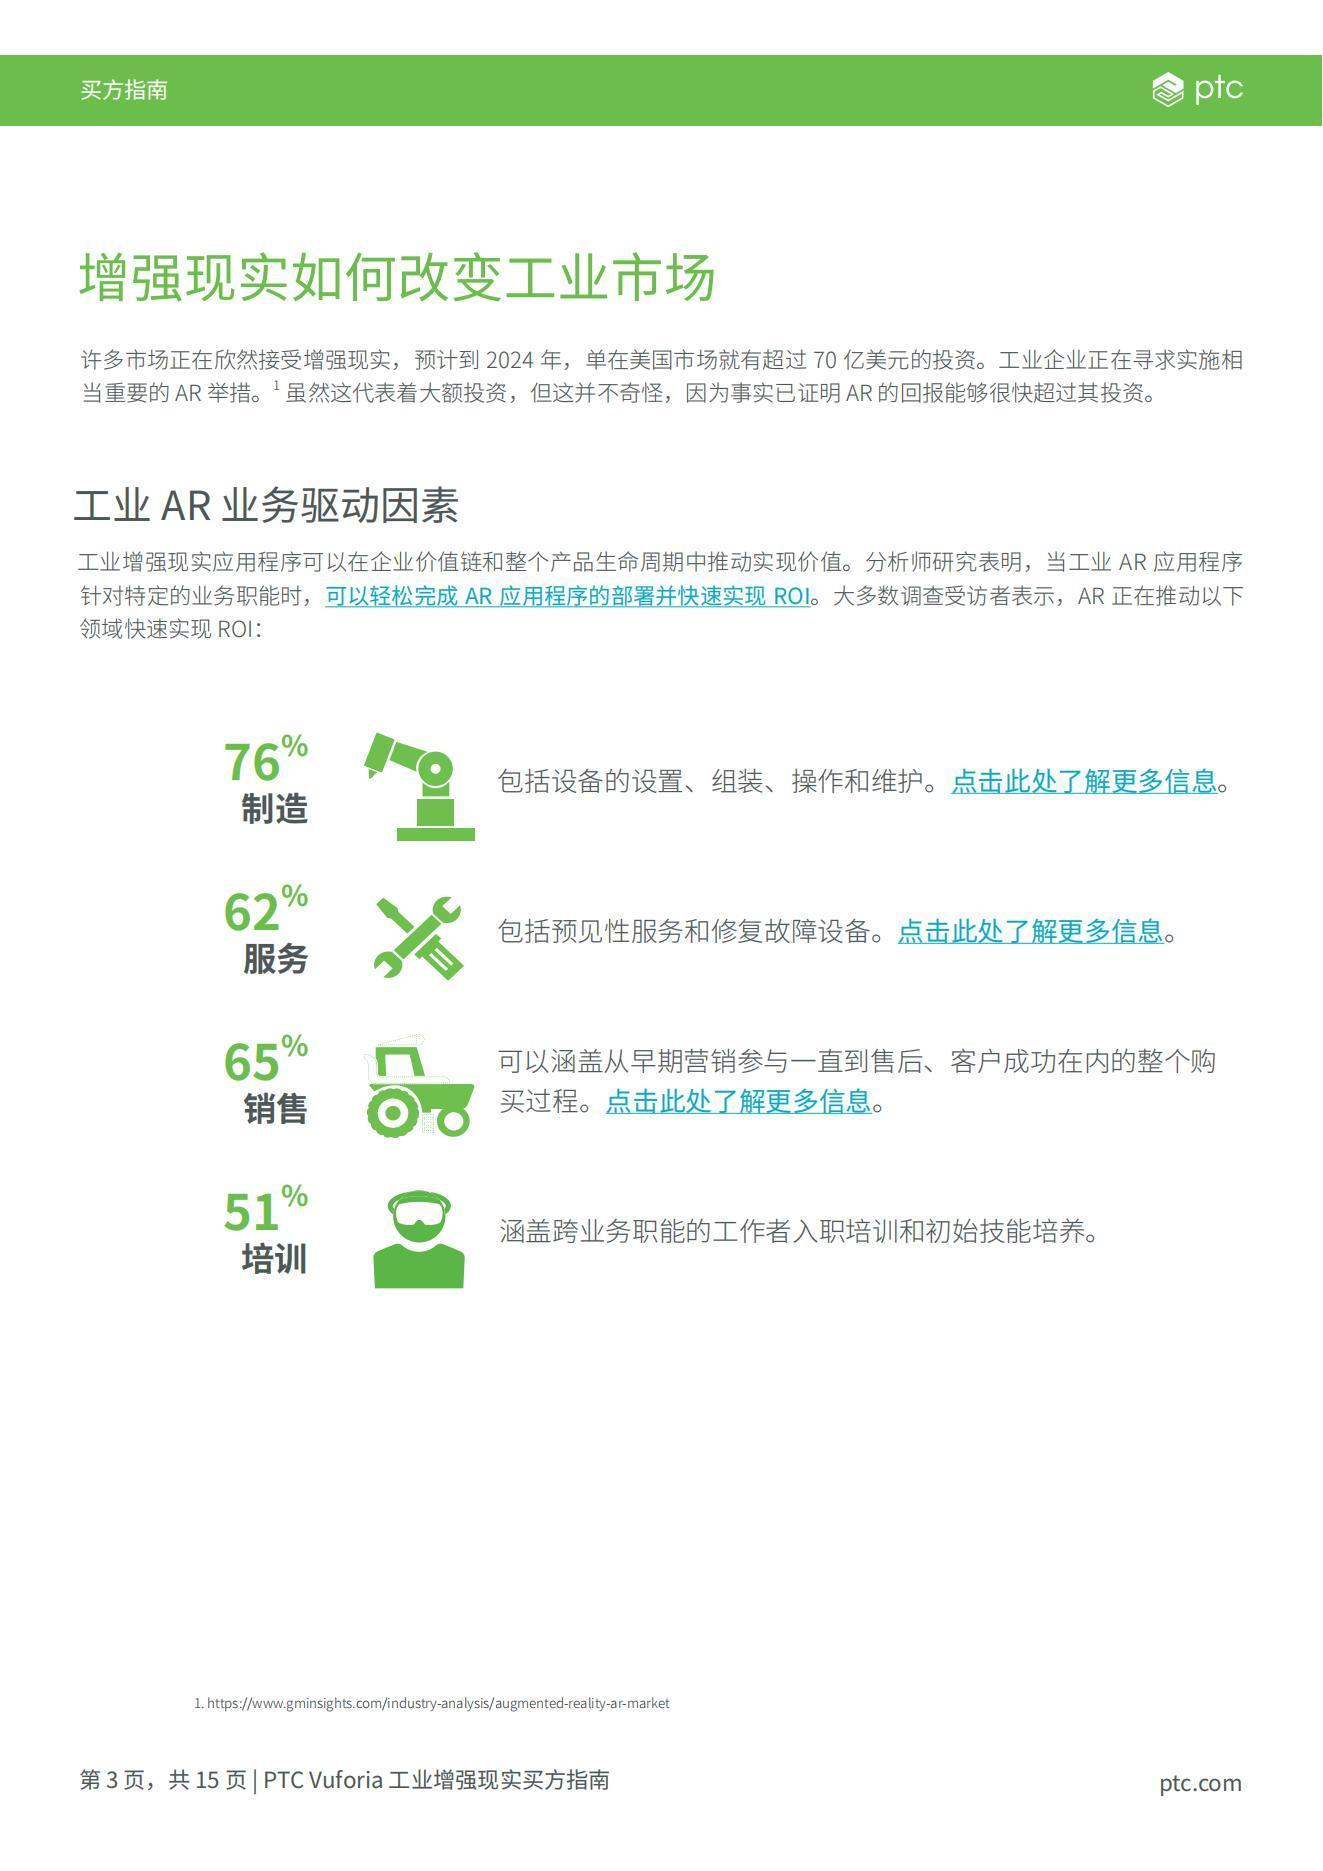 Industrial-Augented-Reality-Buyers-Guide-CN_02